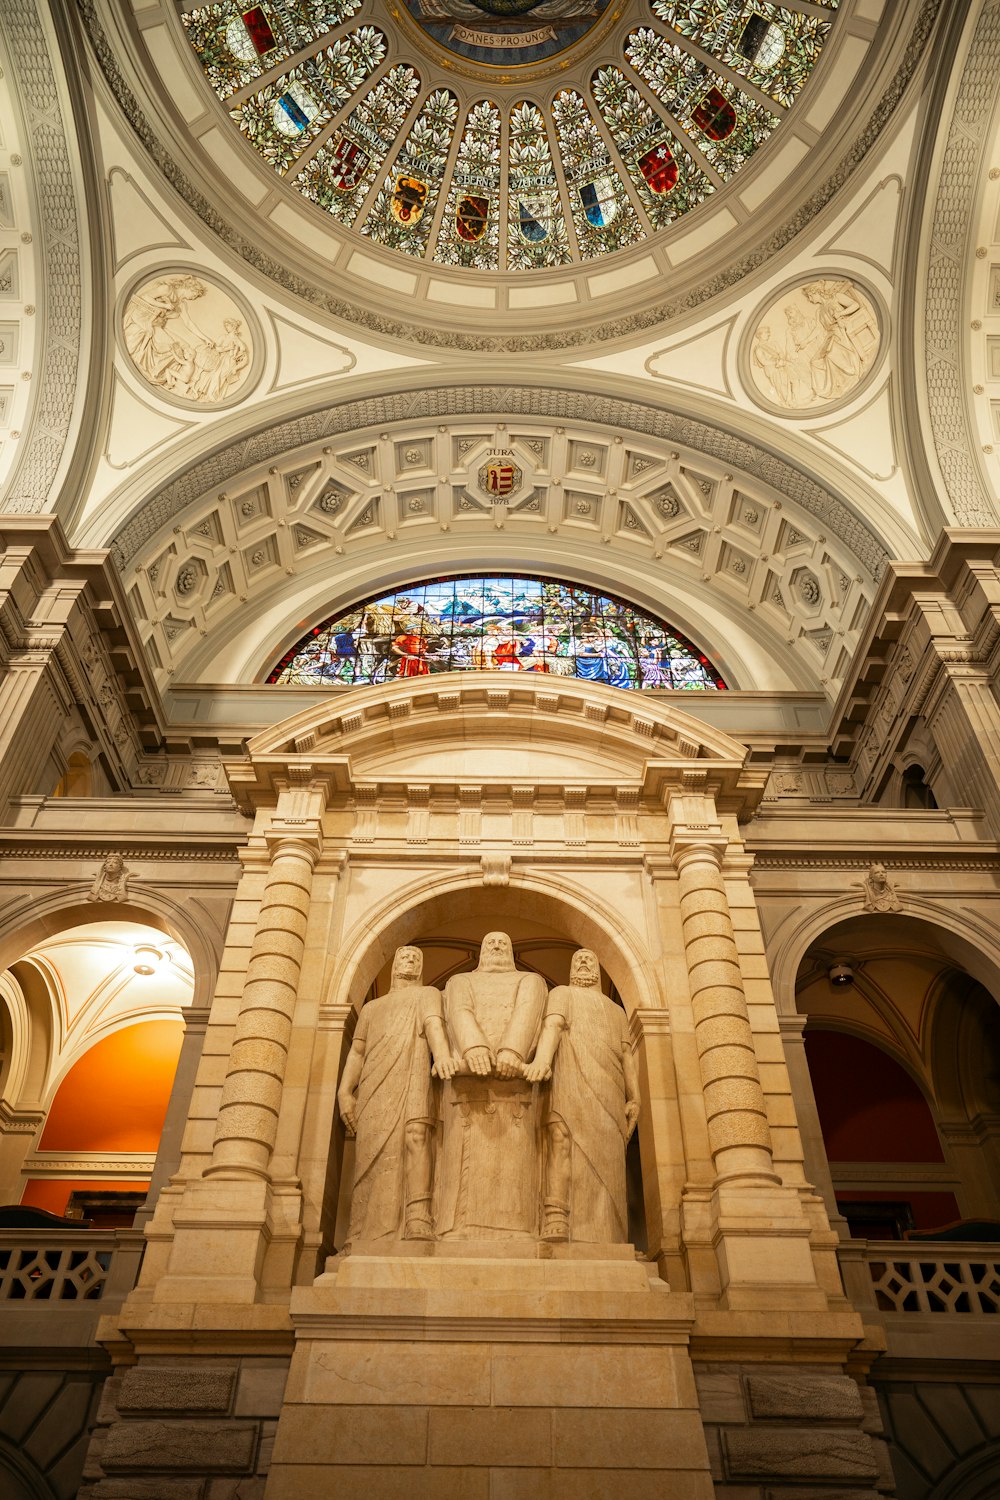 a statue of a man and a woman under a stained glass dome